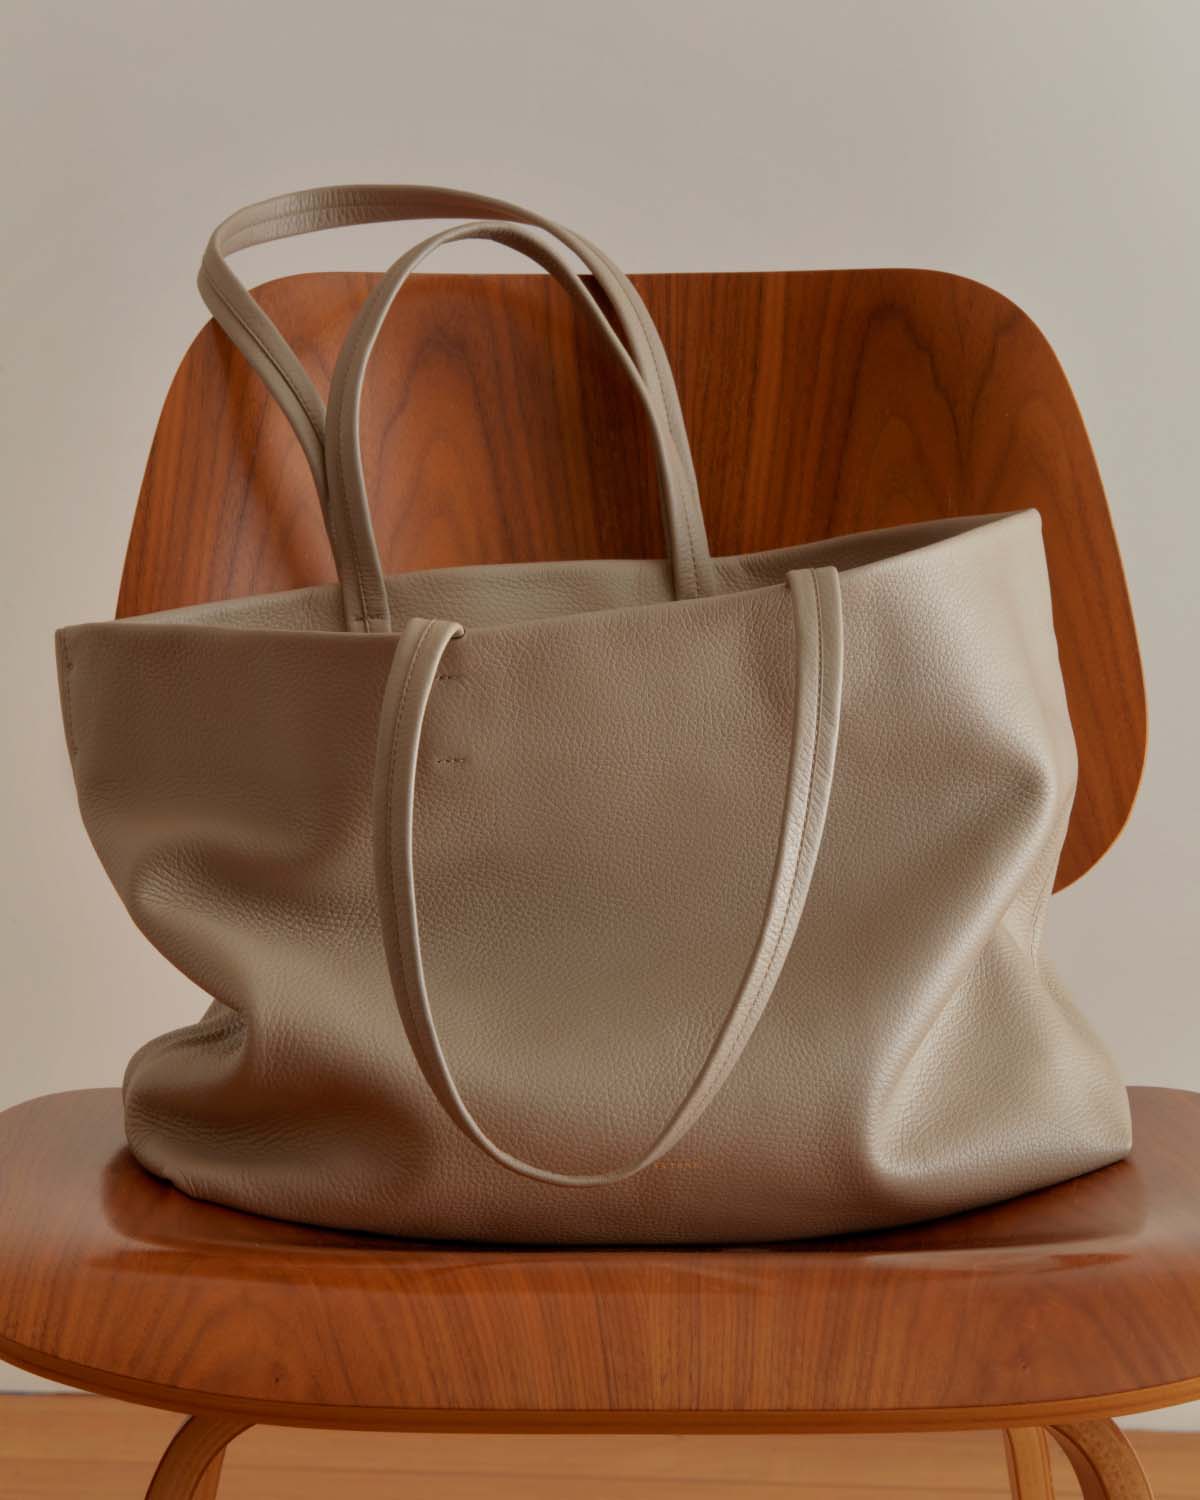 Cuyana, Bags, Cuyana New Small Easy Tote In Cappuccino Bag Purse Pebbled  Italian Leather Nwt